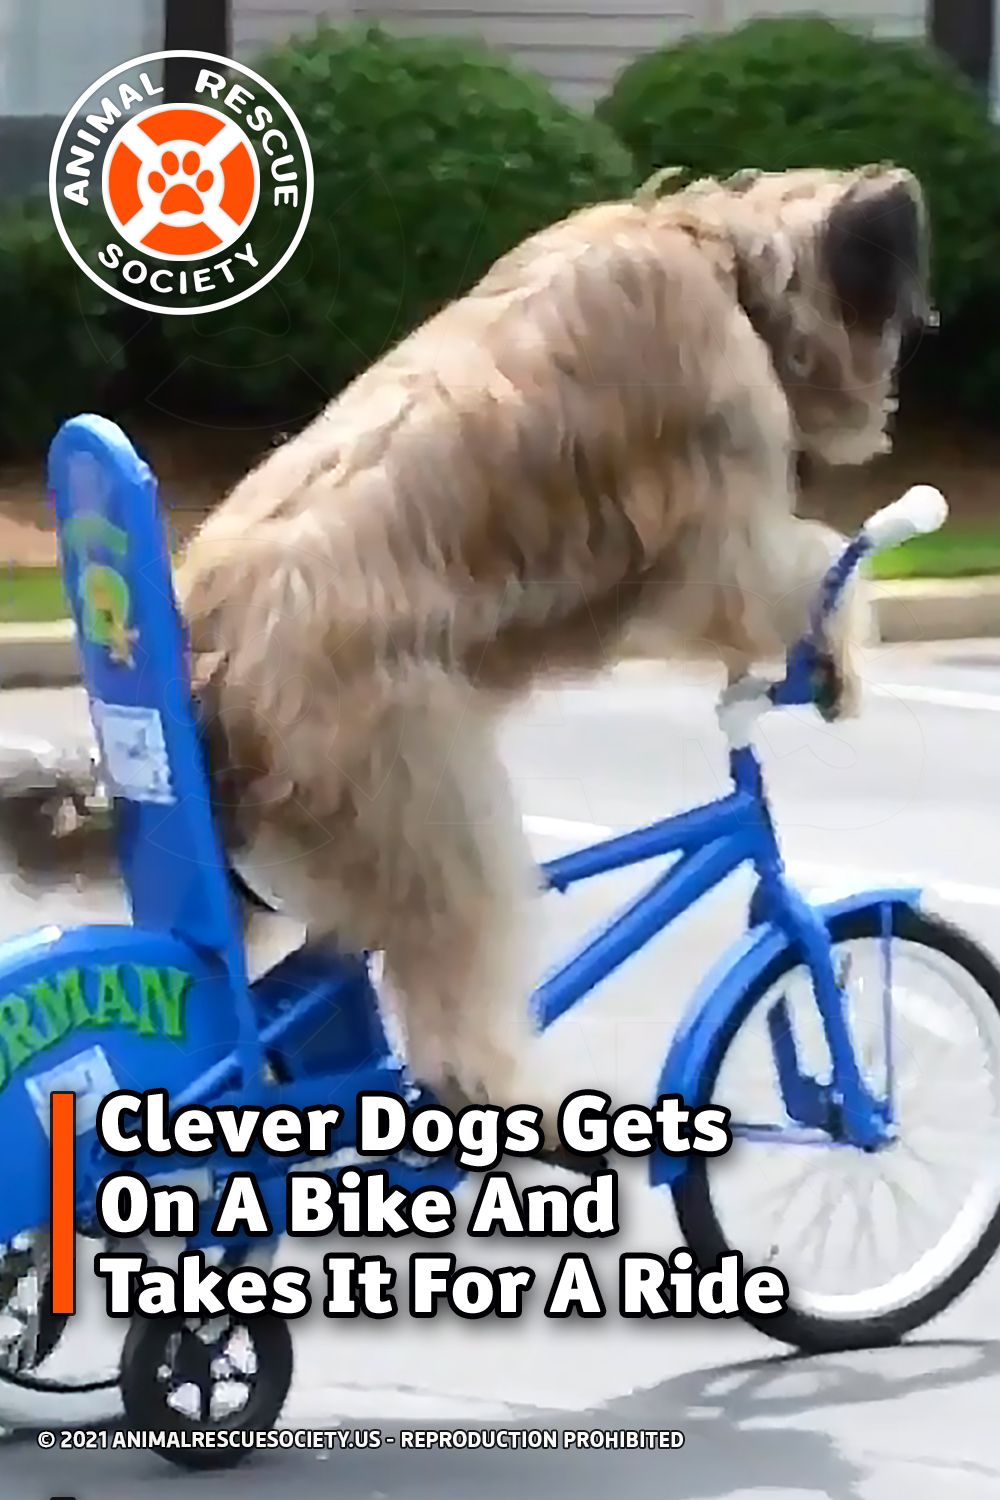 Clever Dogs Gets On A Bike And Takes It For A Ride